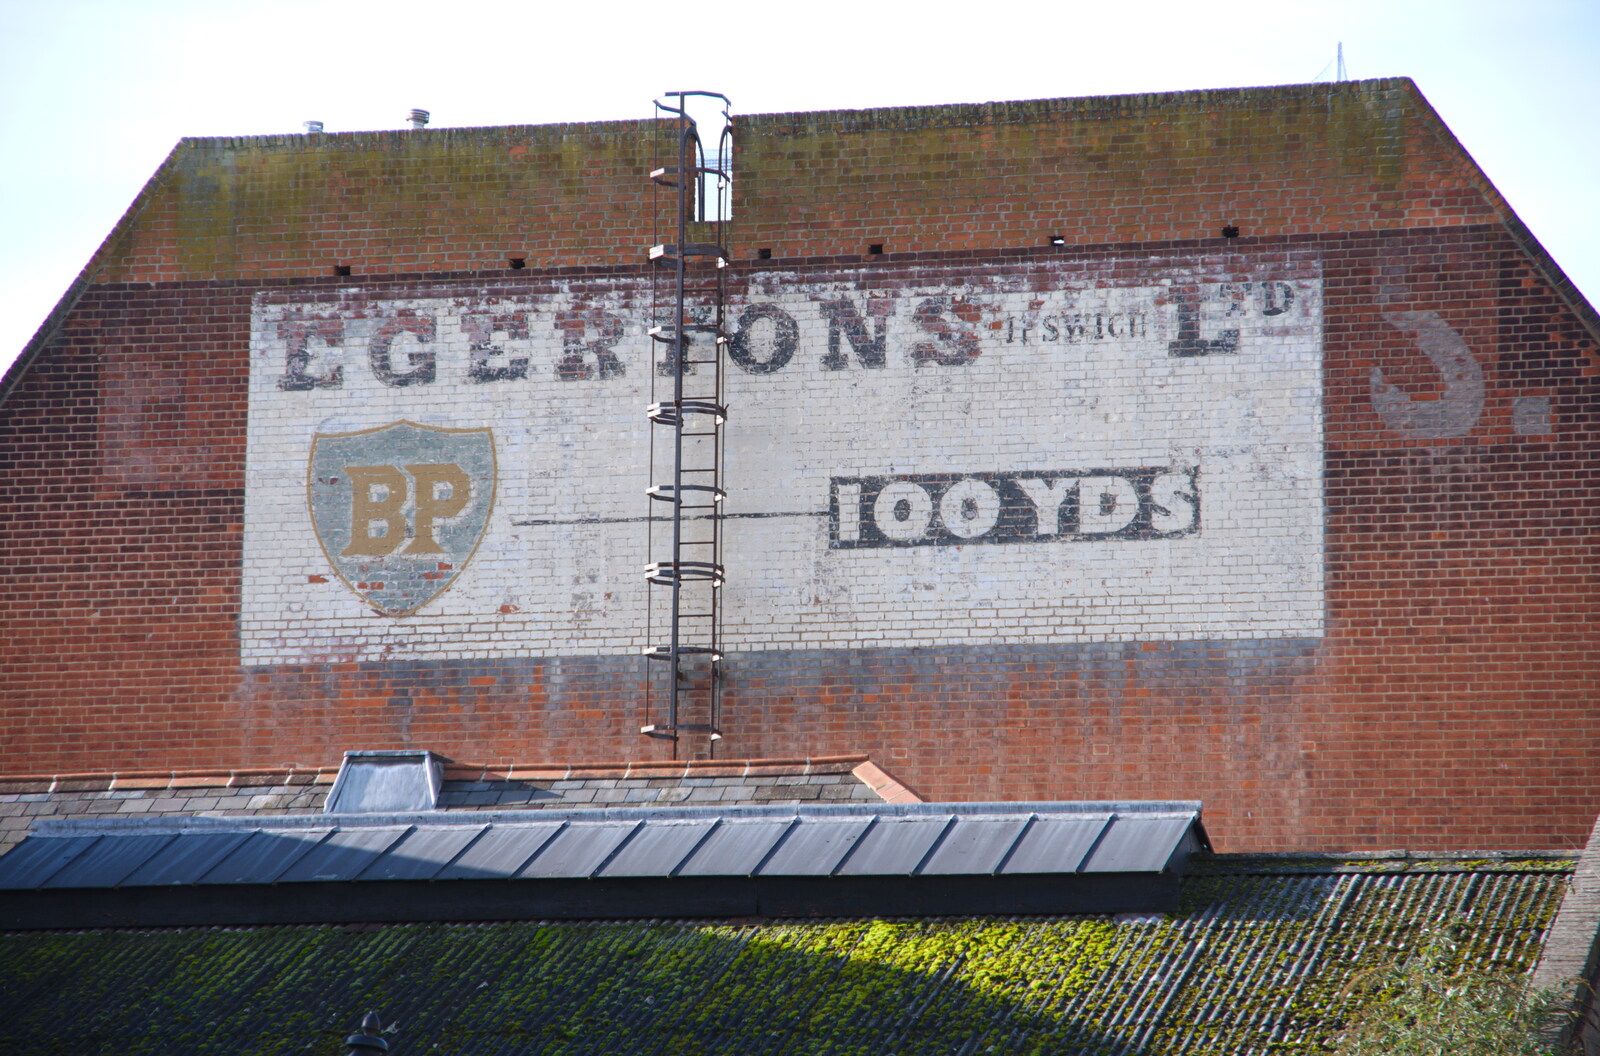 An old Egerton's sign on Crown Street from Exam Day Dereliction, Ipswich, Suffolk - 13th November 2019